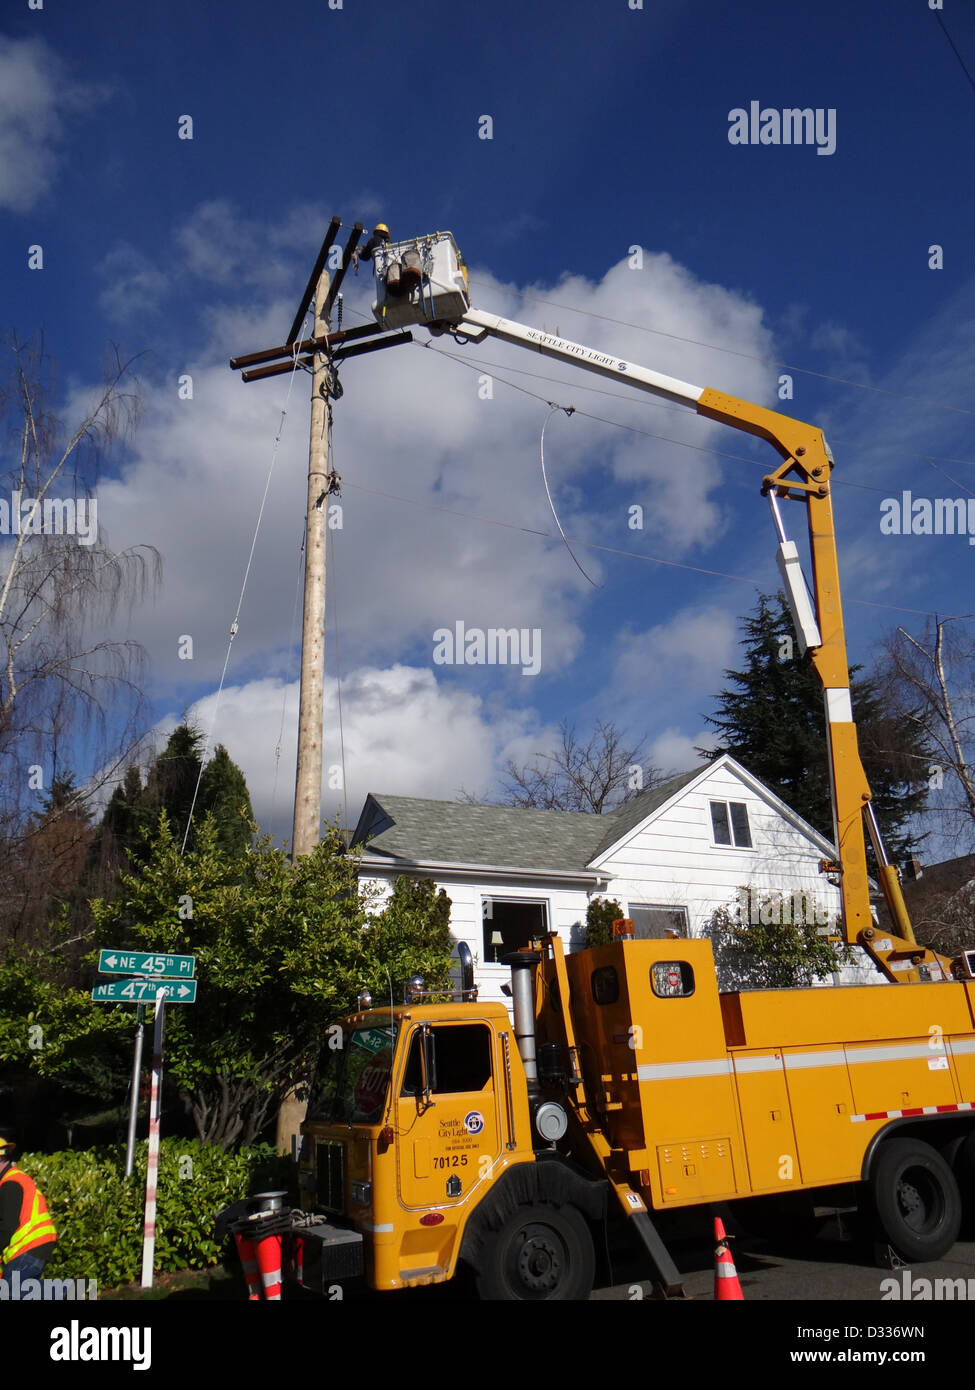 Seattle City Light workmen replace an aging utility pole as part of a city wide project to improve electrical reliability, on Feb 7, 2013 in Seattle. Stock Photo